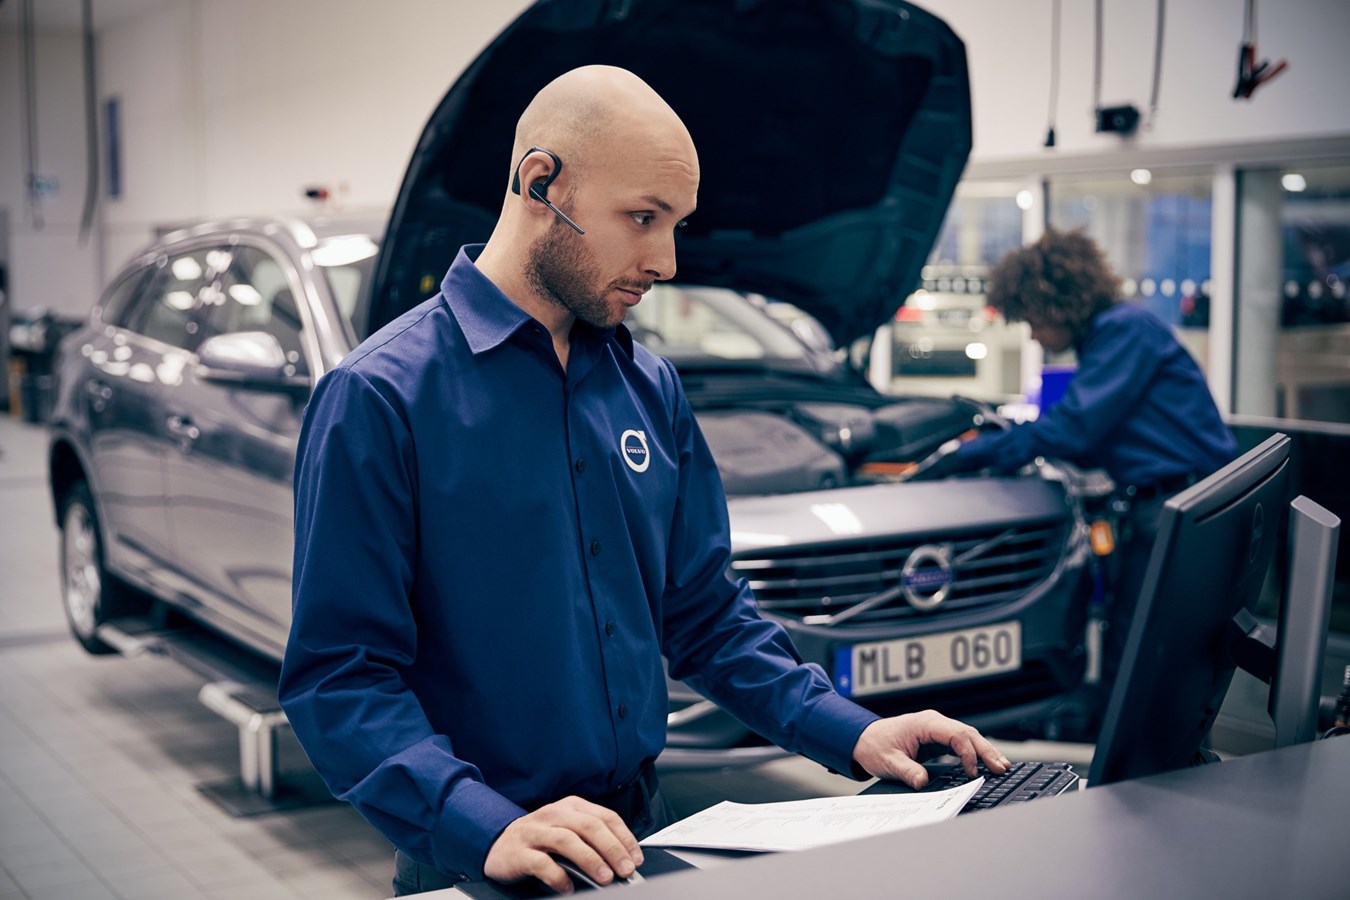 Volvo Car USA lowers student debt for new auto service technicians